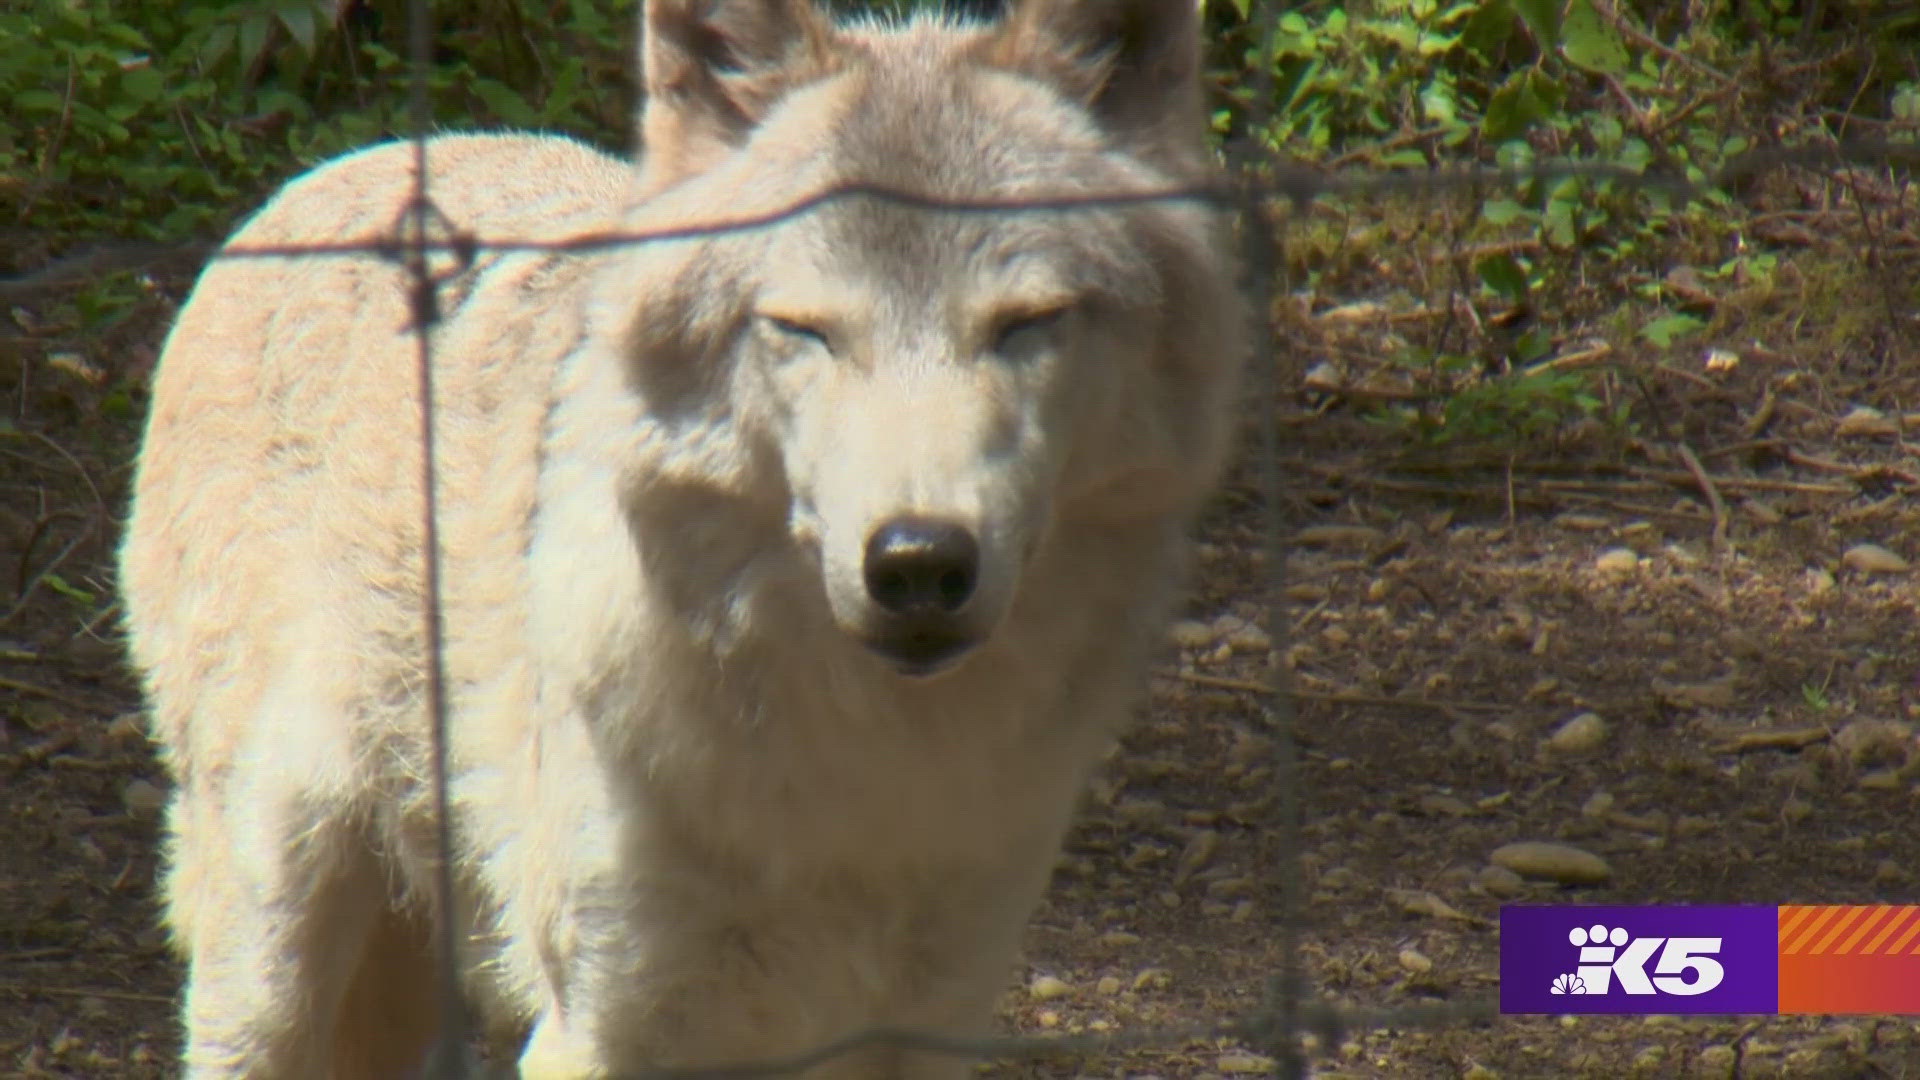 Roam saves near-wolves and educates humans about them and their wild wolf cousins. #k5evening